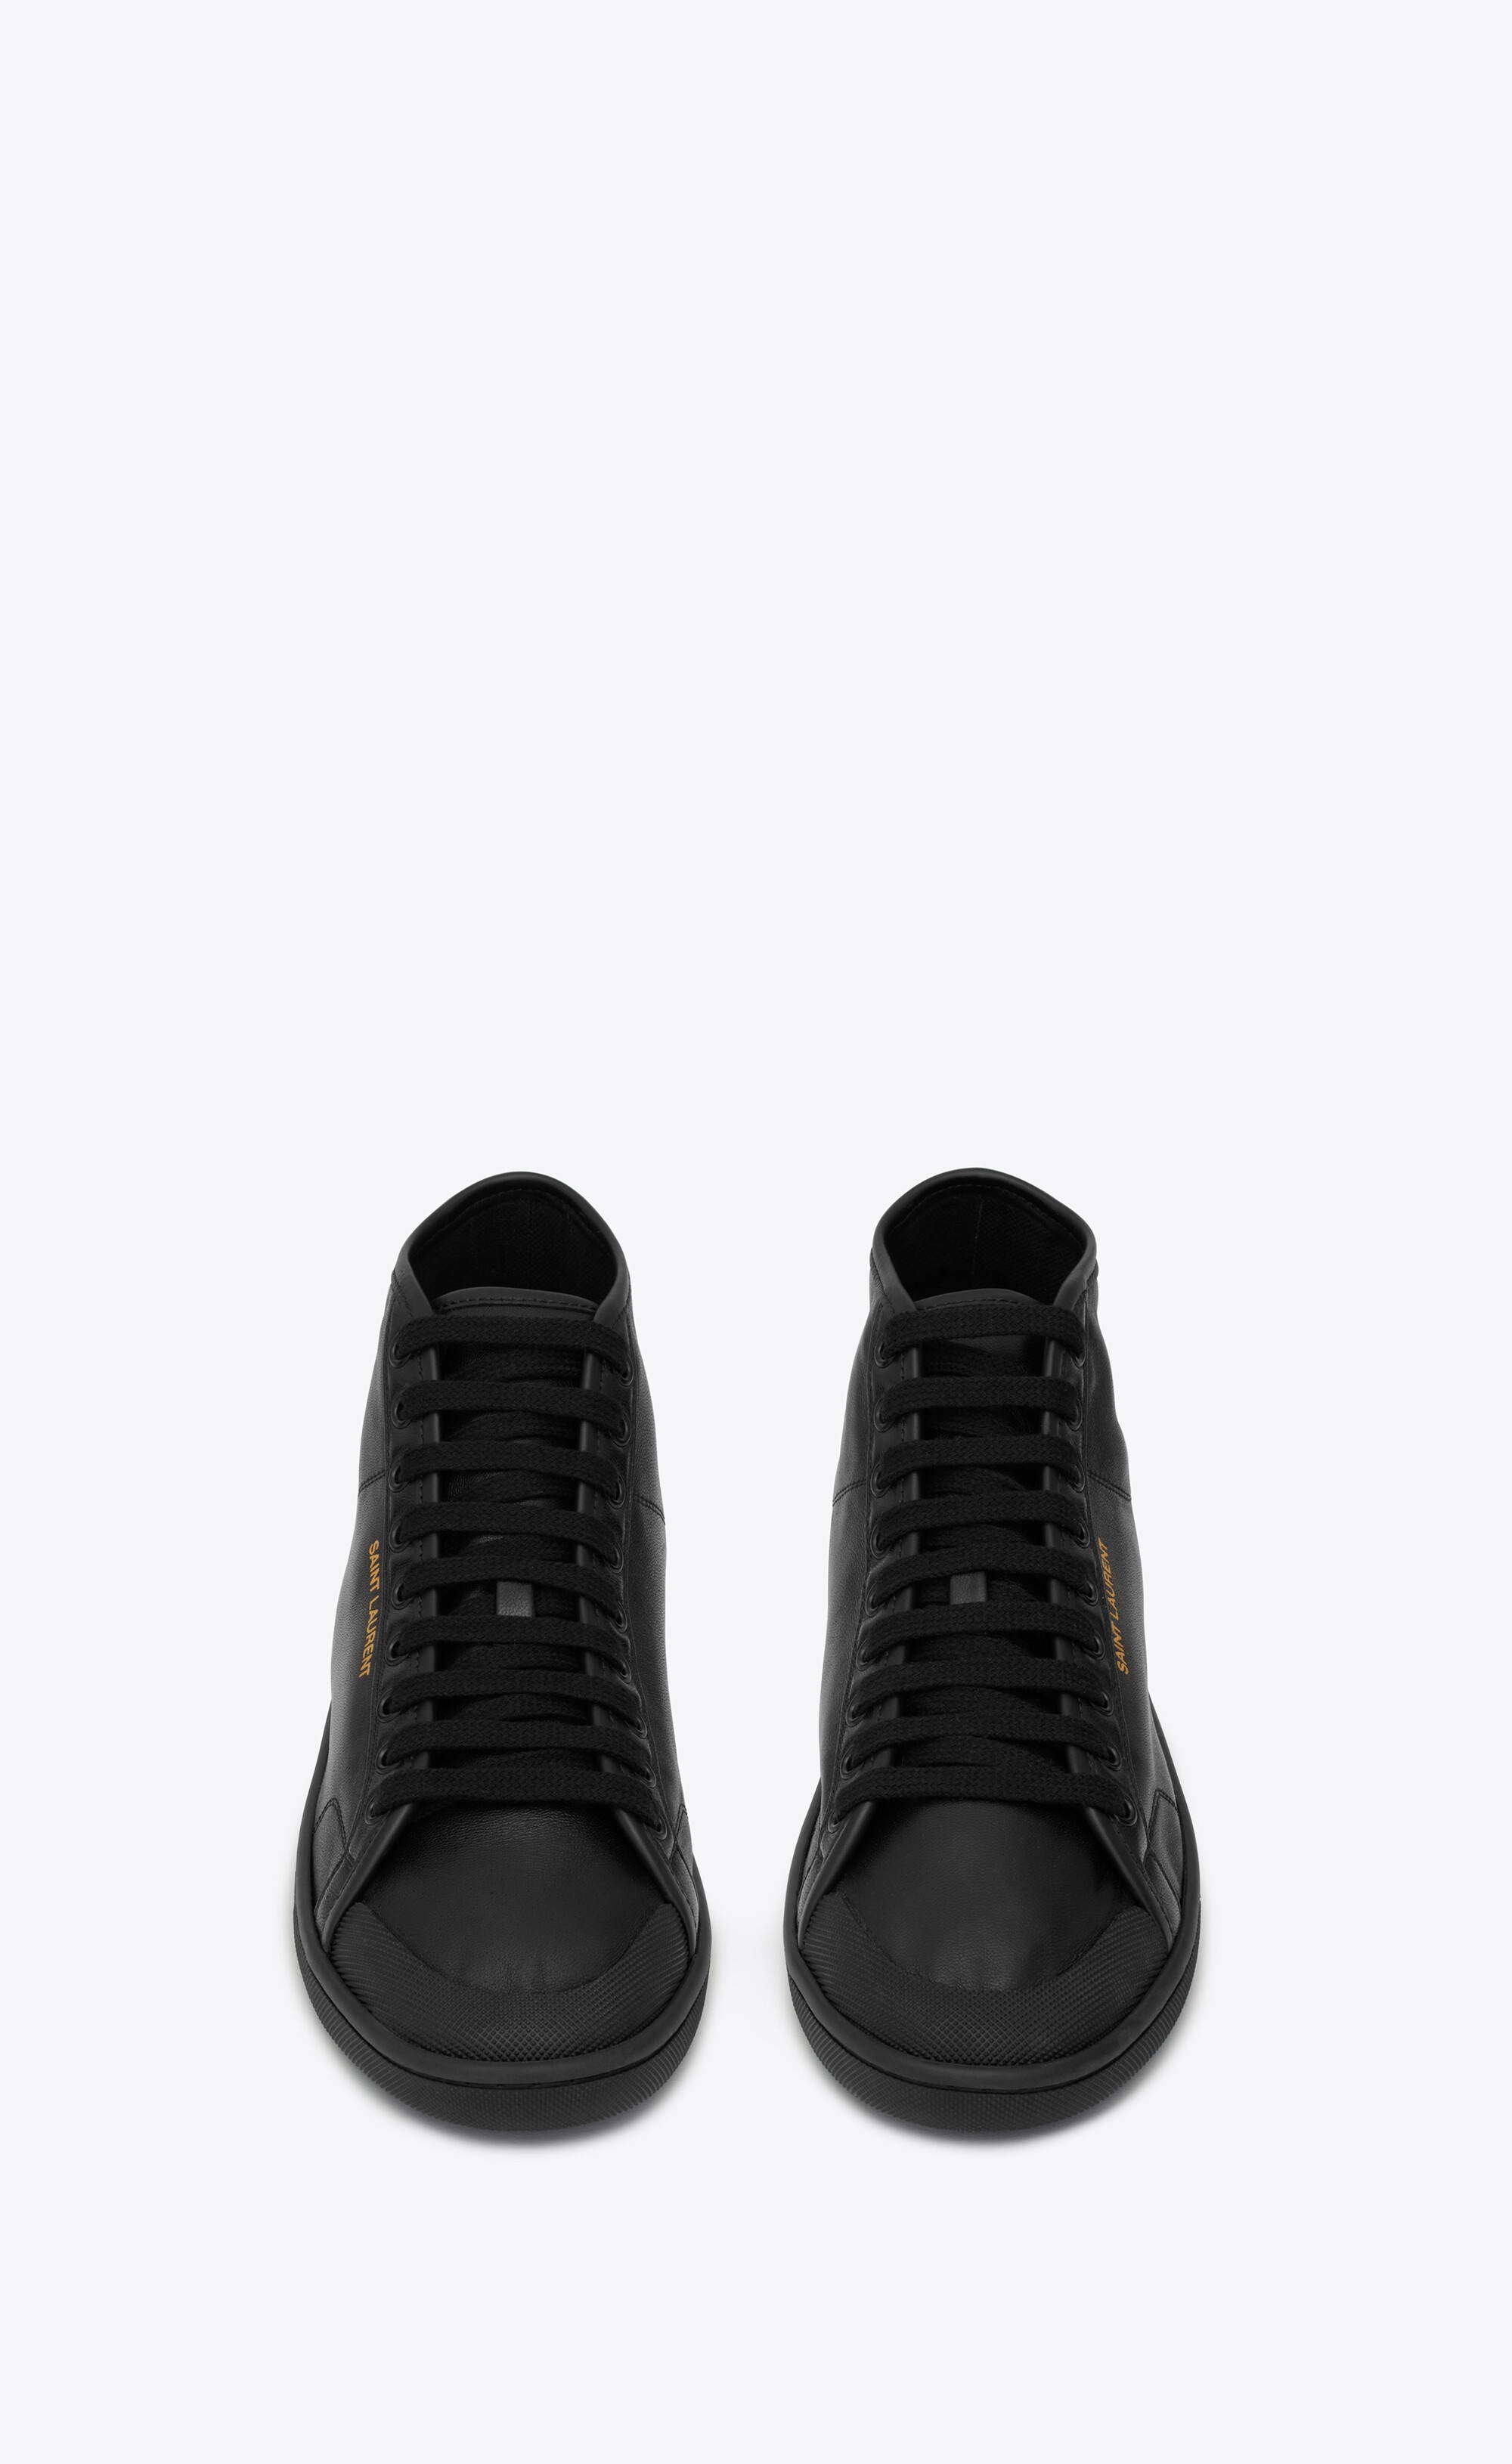 court classic sl/39 mid-top sneakers in leather - 2